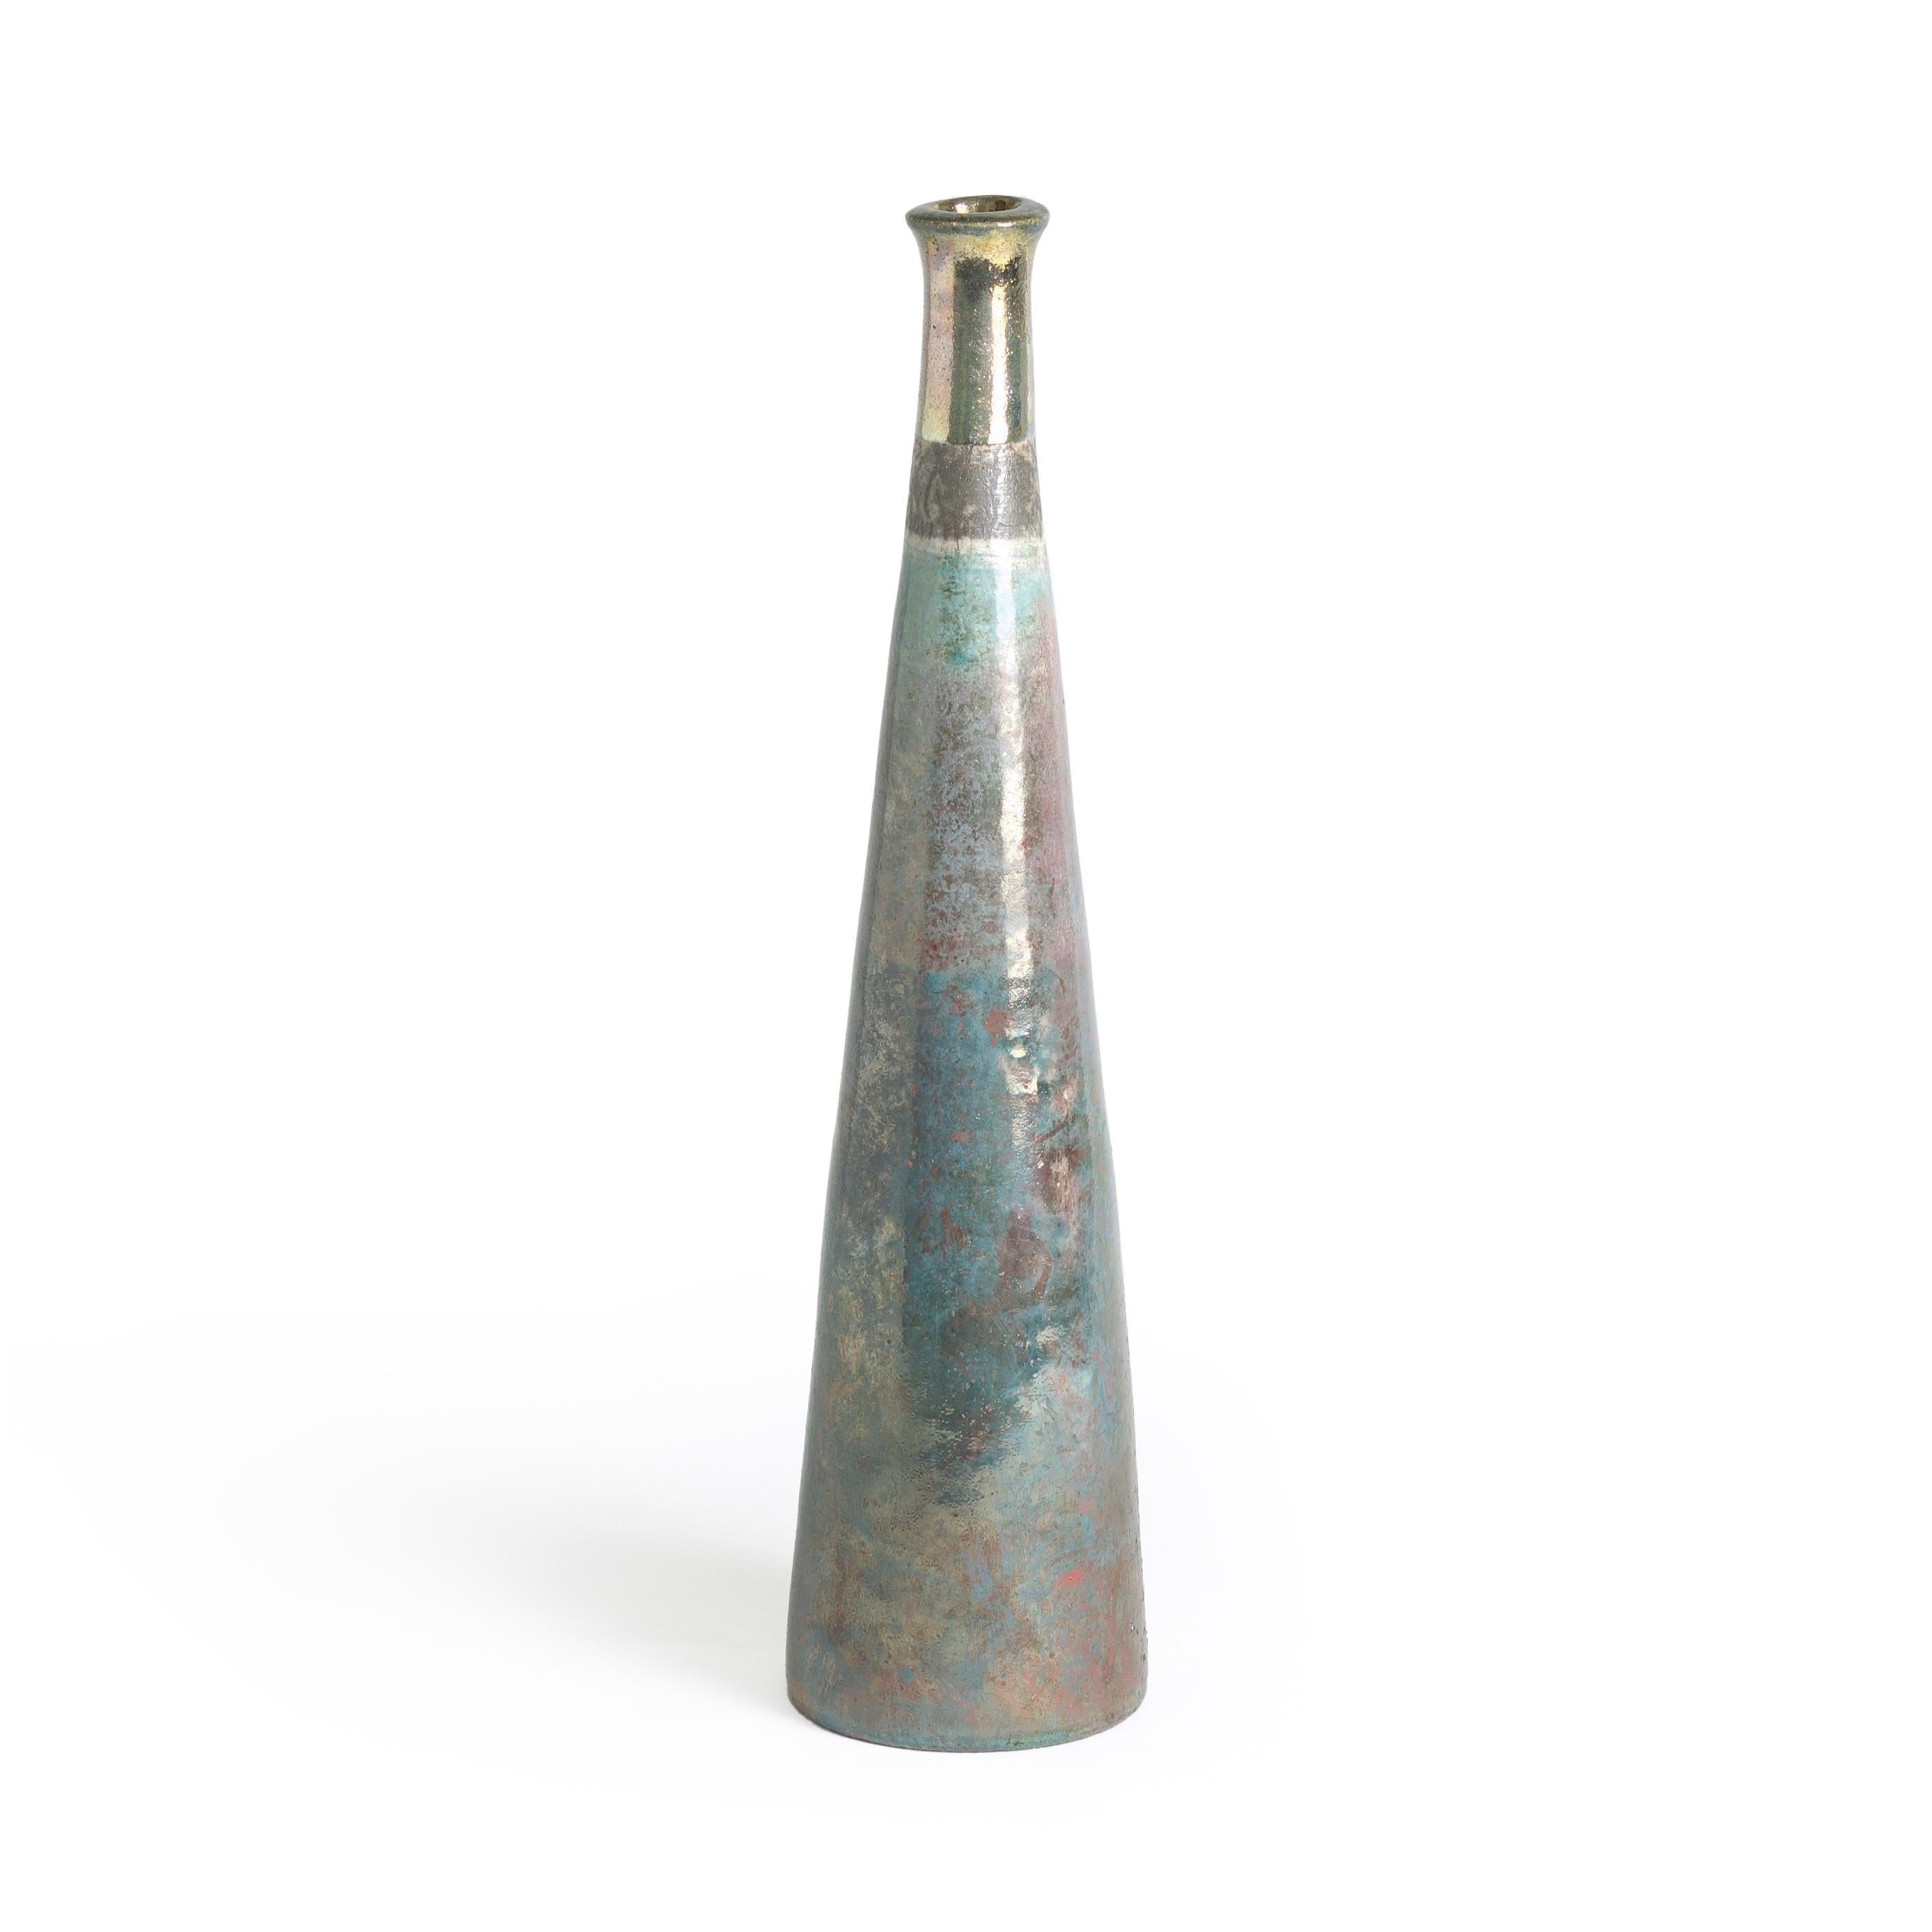 A metallic effect cover the body of this tall candle holder ranging from shades of copper green and turquoise to red oxyde iron while the top features a gold finishing realized by a third firing process executed after the Raku firing, showcasing